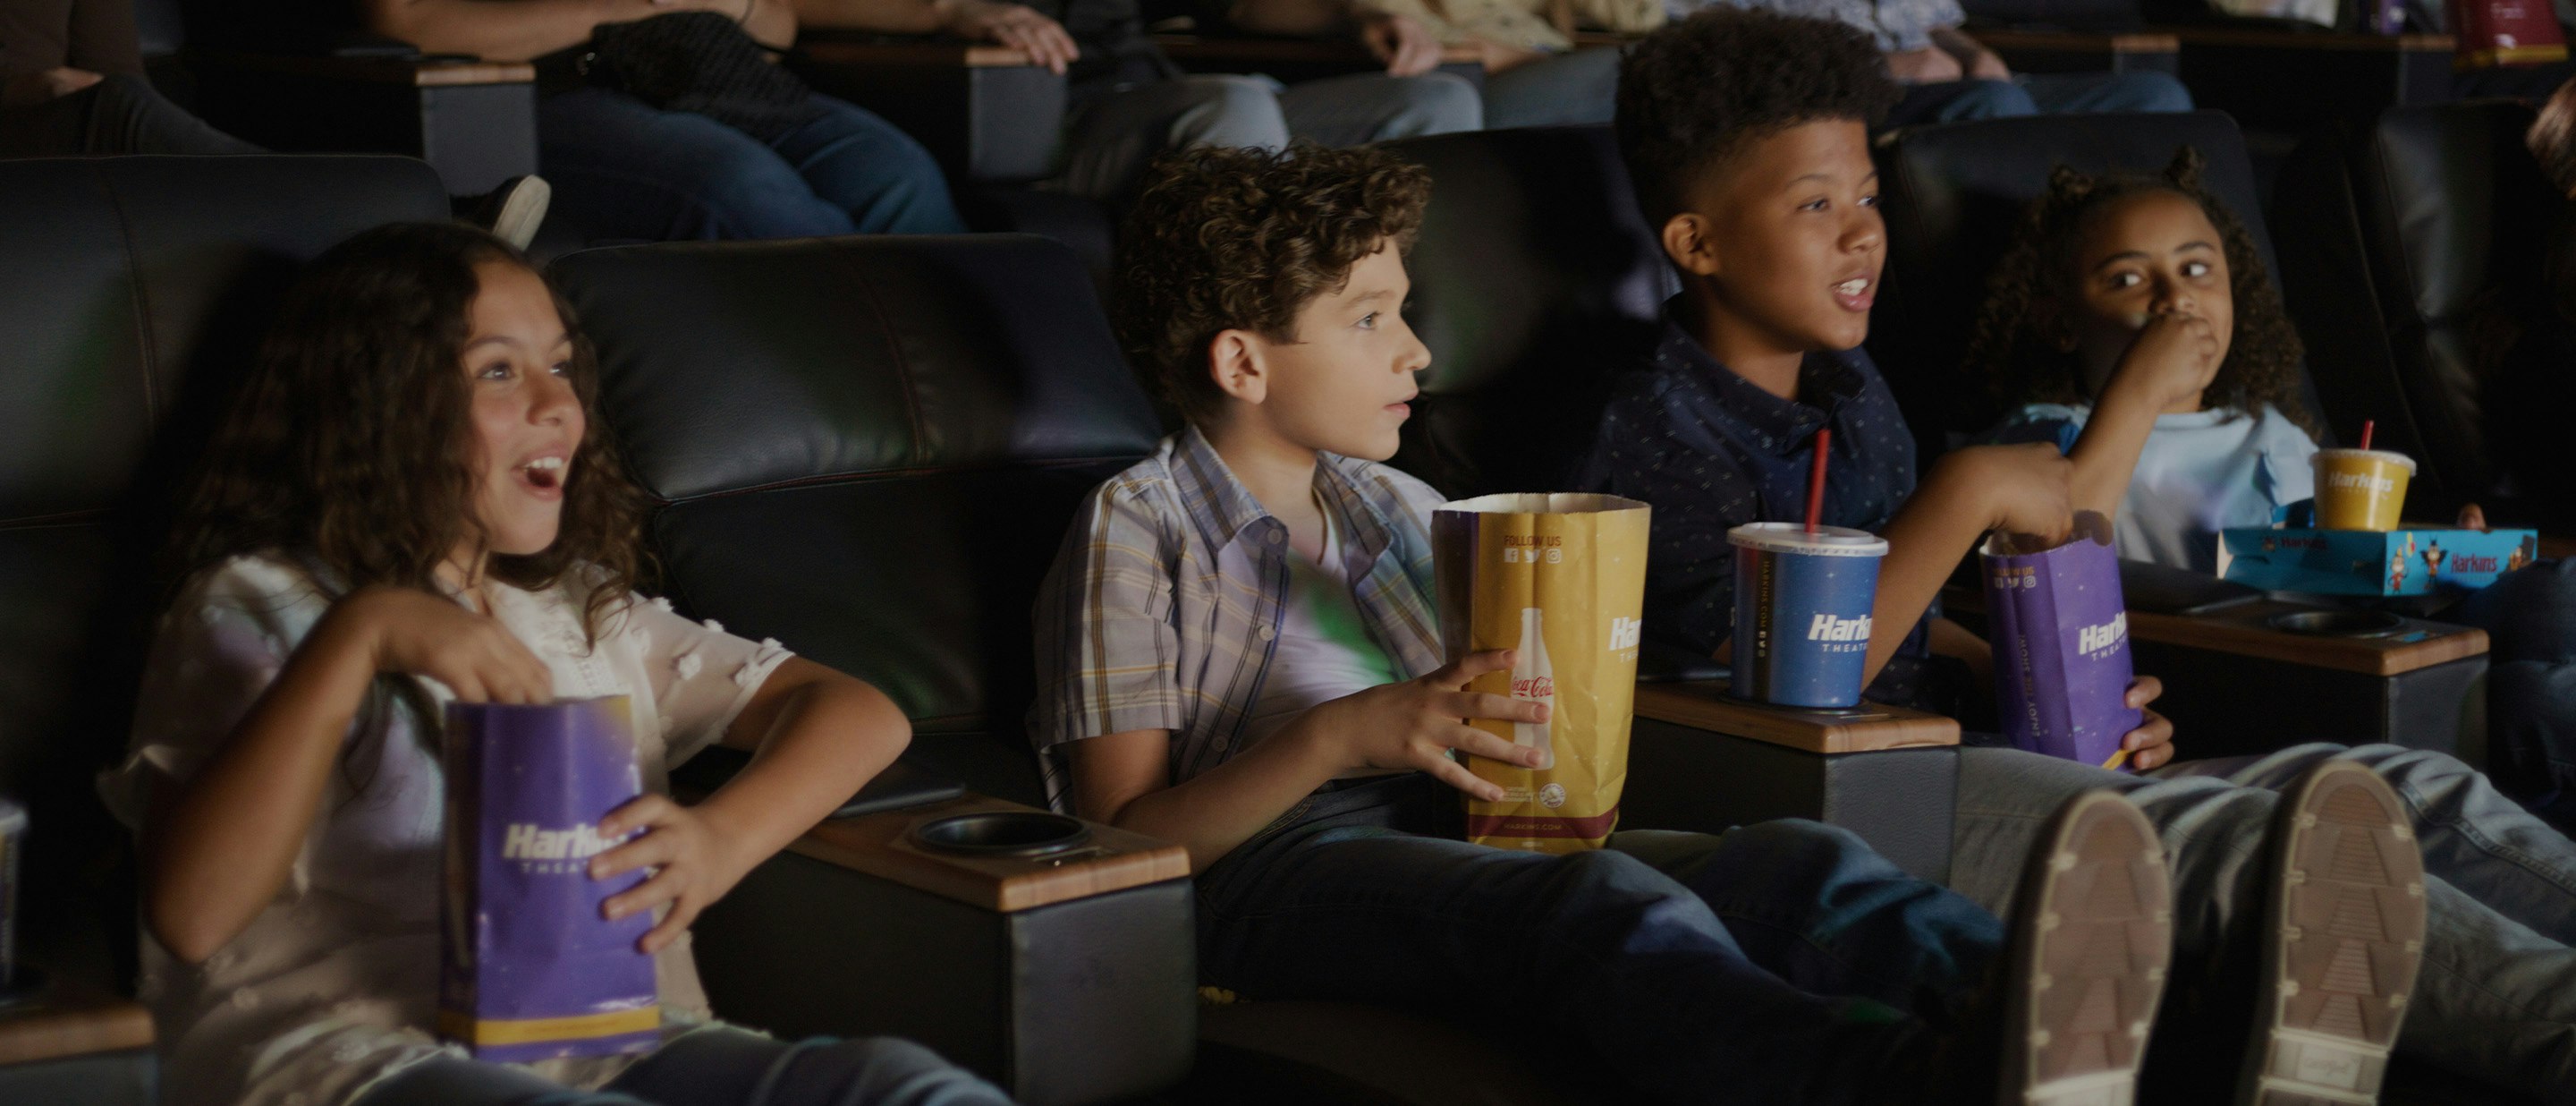 Sensory friendly screenings include brightened light levels, reduced sound volume and room for guest interaction.